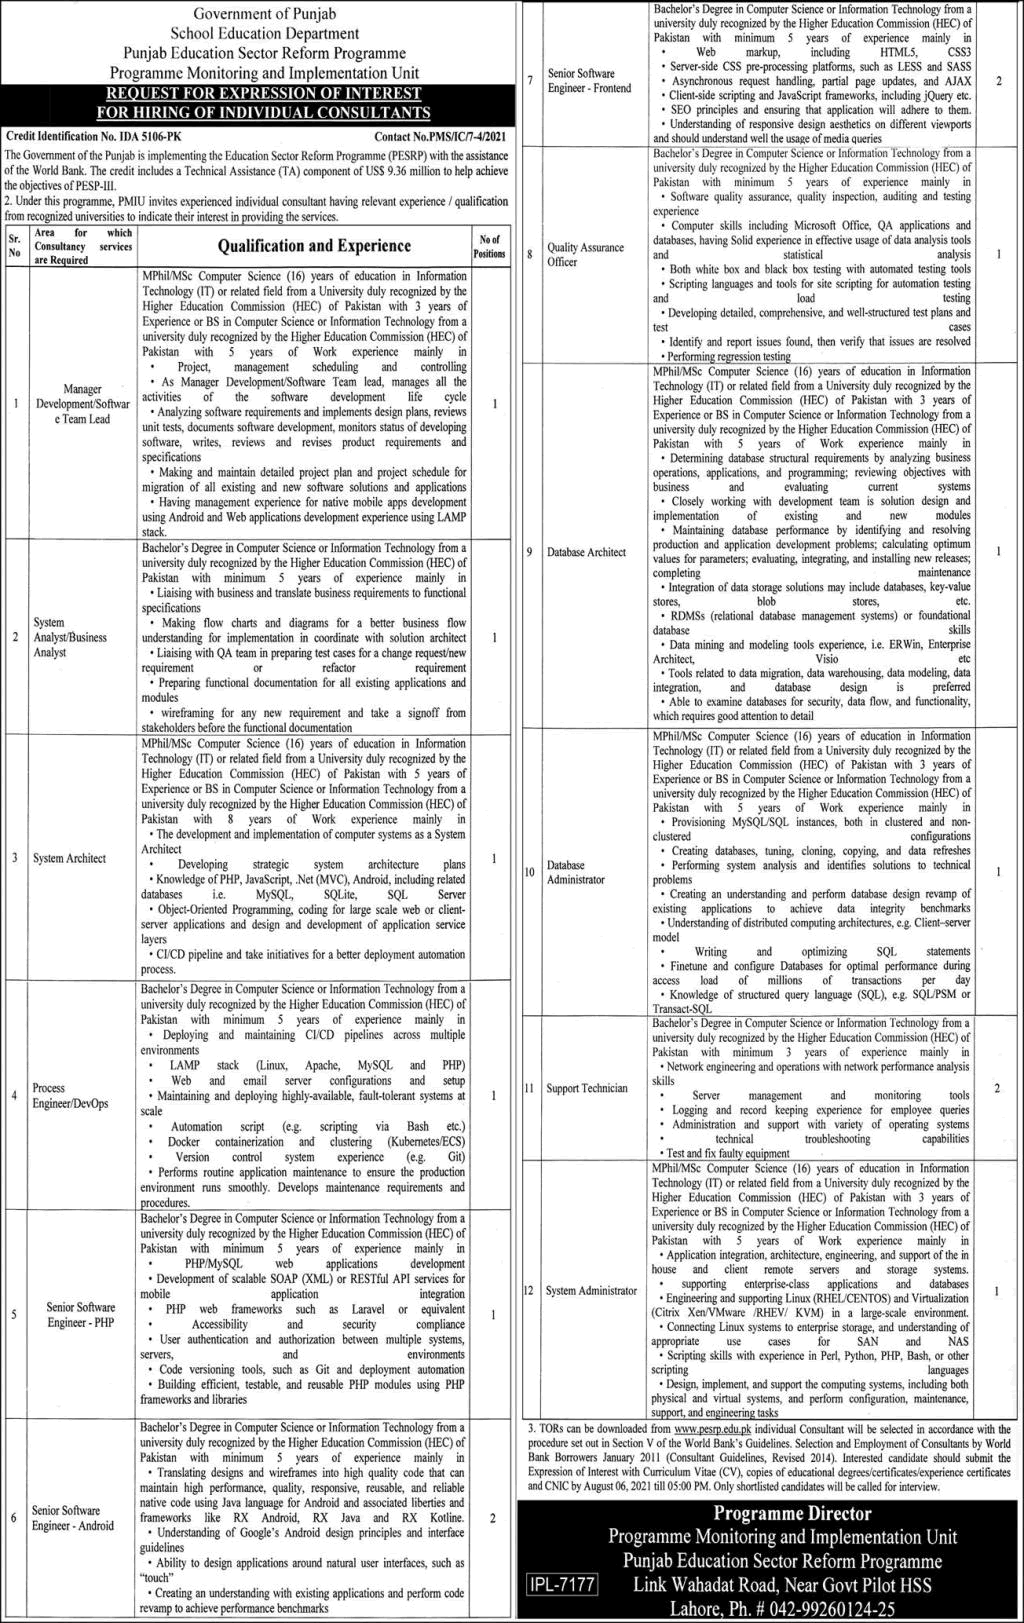 Punjab School Education Department Jobs July 2021 Software Engineers & Others Latest